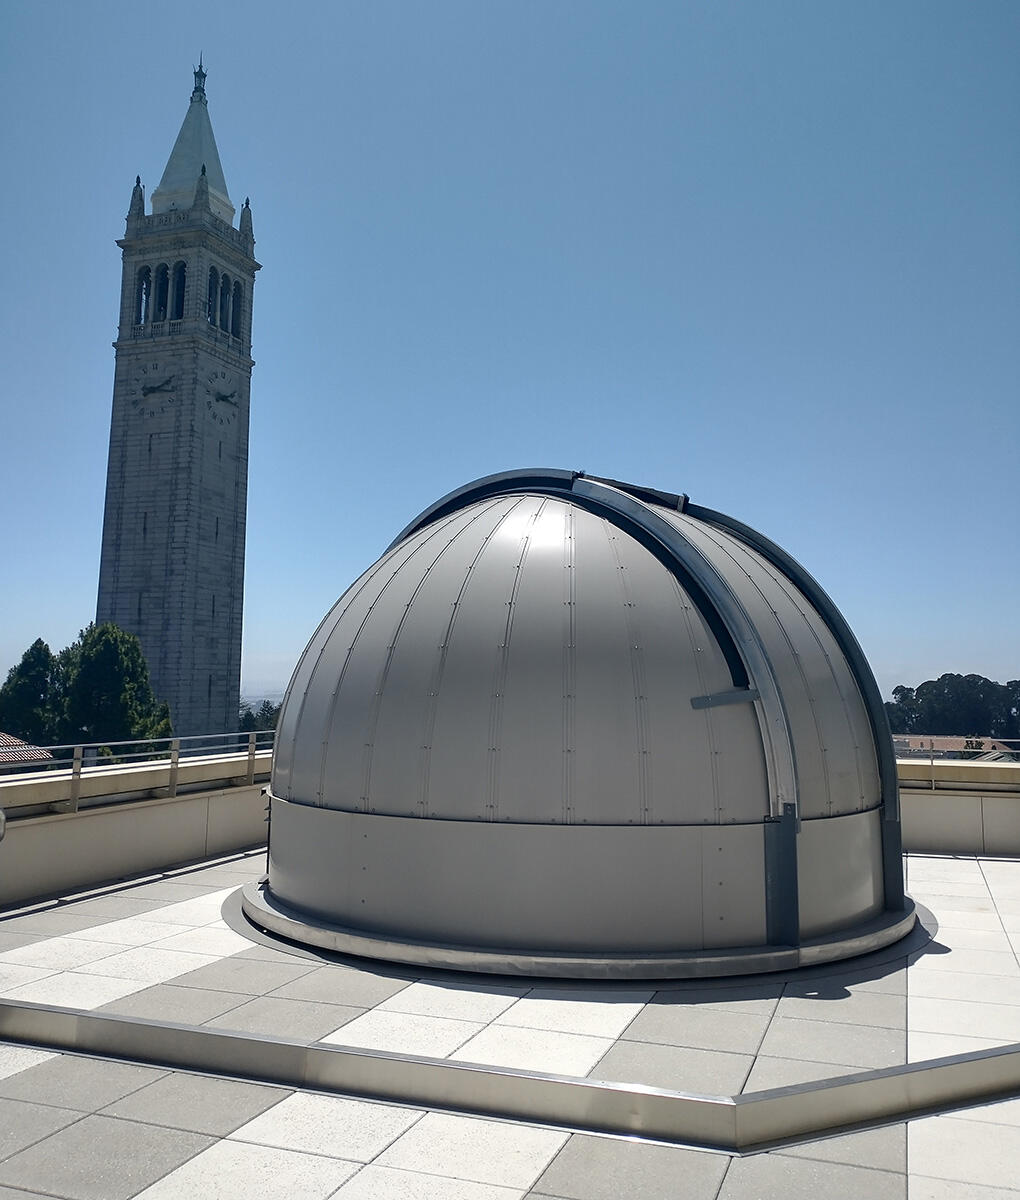 The dome of Campbell Hall's rooftop observatory in front of the Campanile.